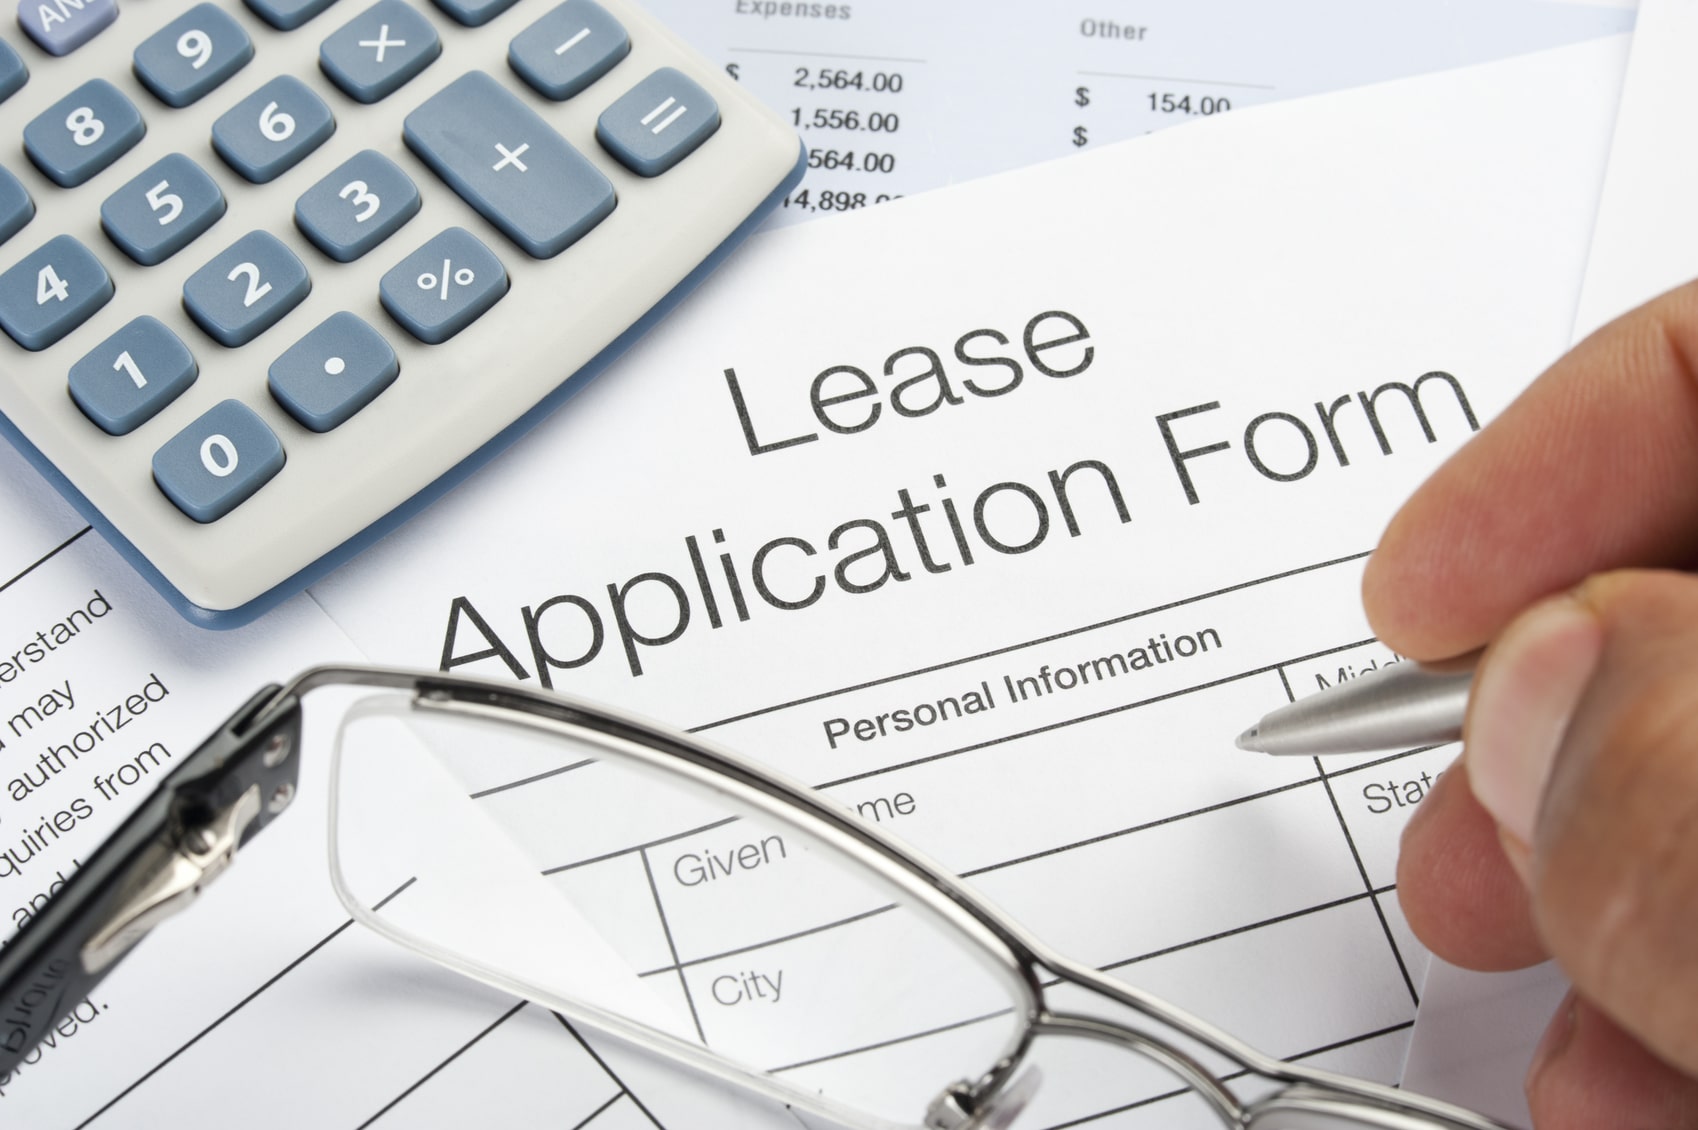 lease application form and office tools